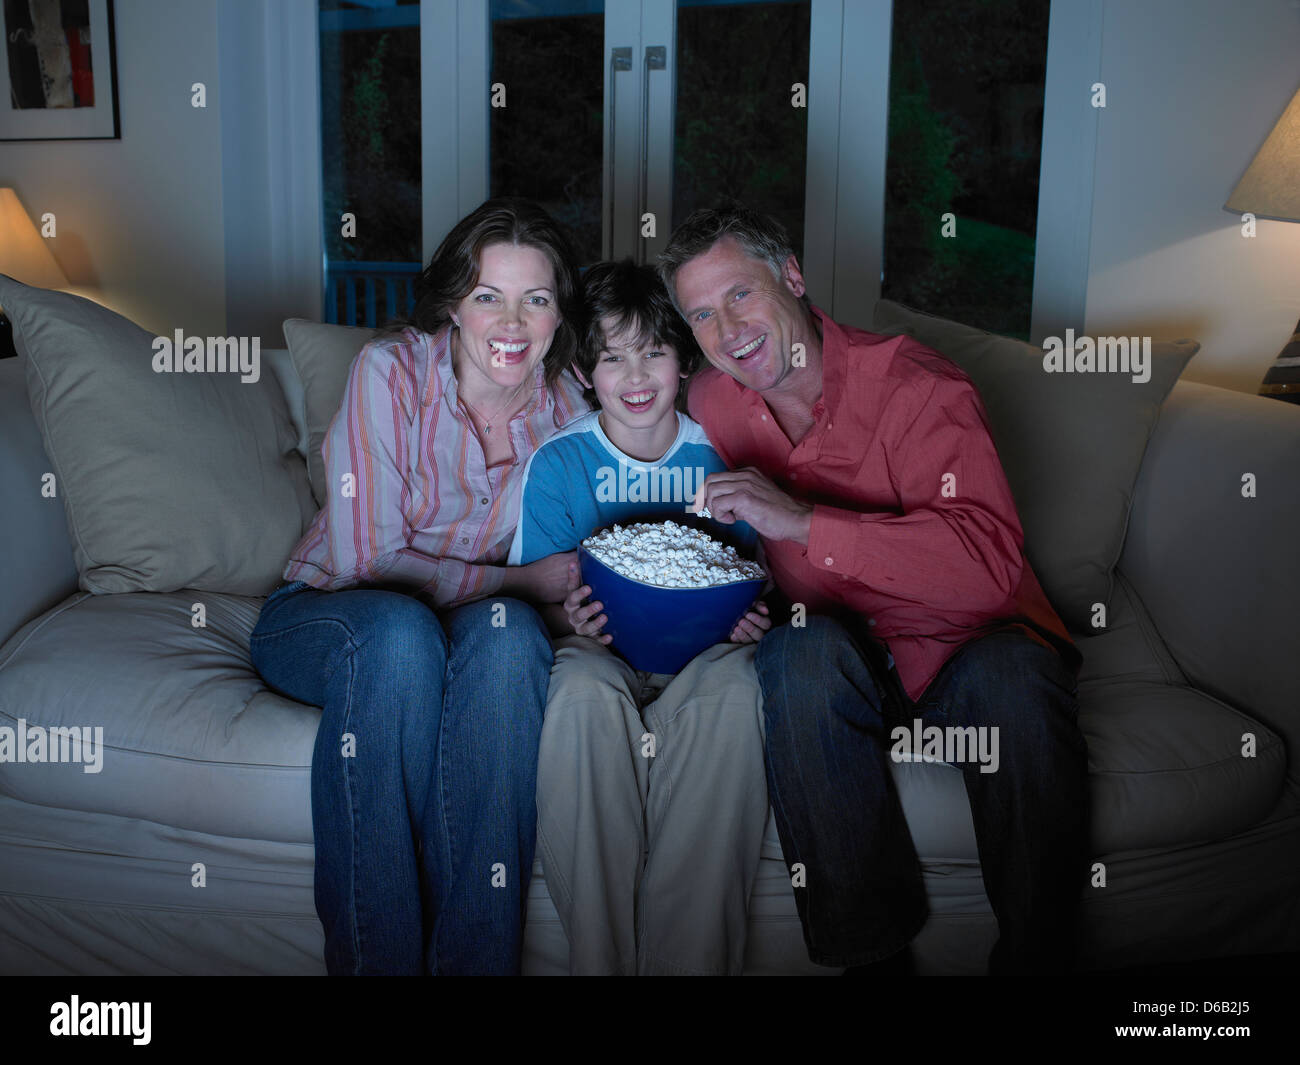 Family watching movie together Stock Photo